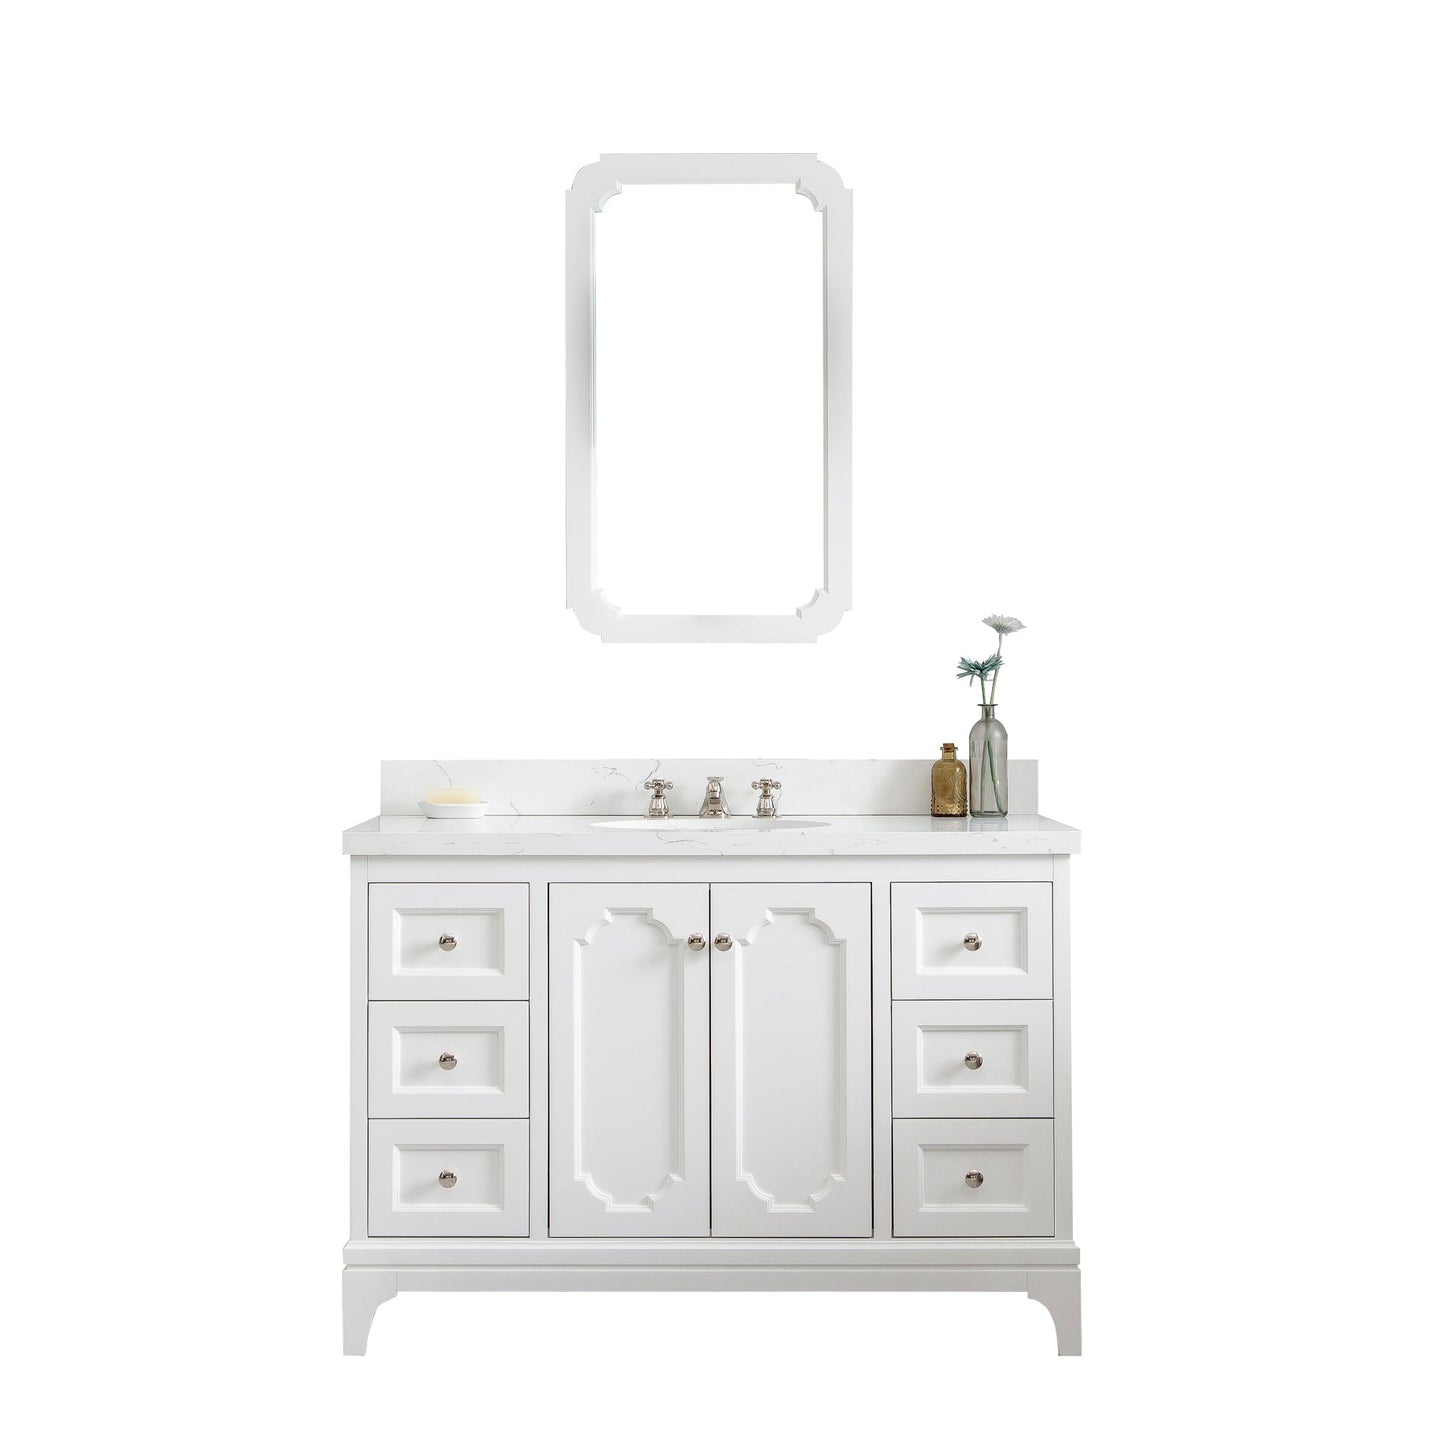 Queen 48-Inch Single Sink Quartz Carrara Vanity In Pure White With Matching Mirror(s) and F2-0012-05-TL Lavatory Faucet(s)